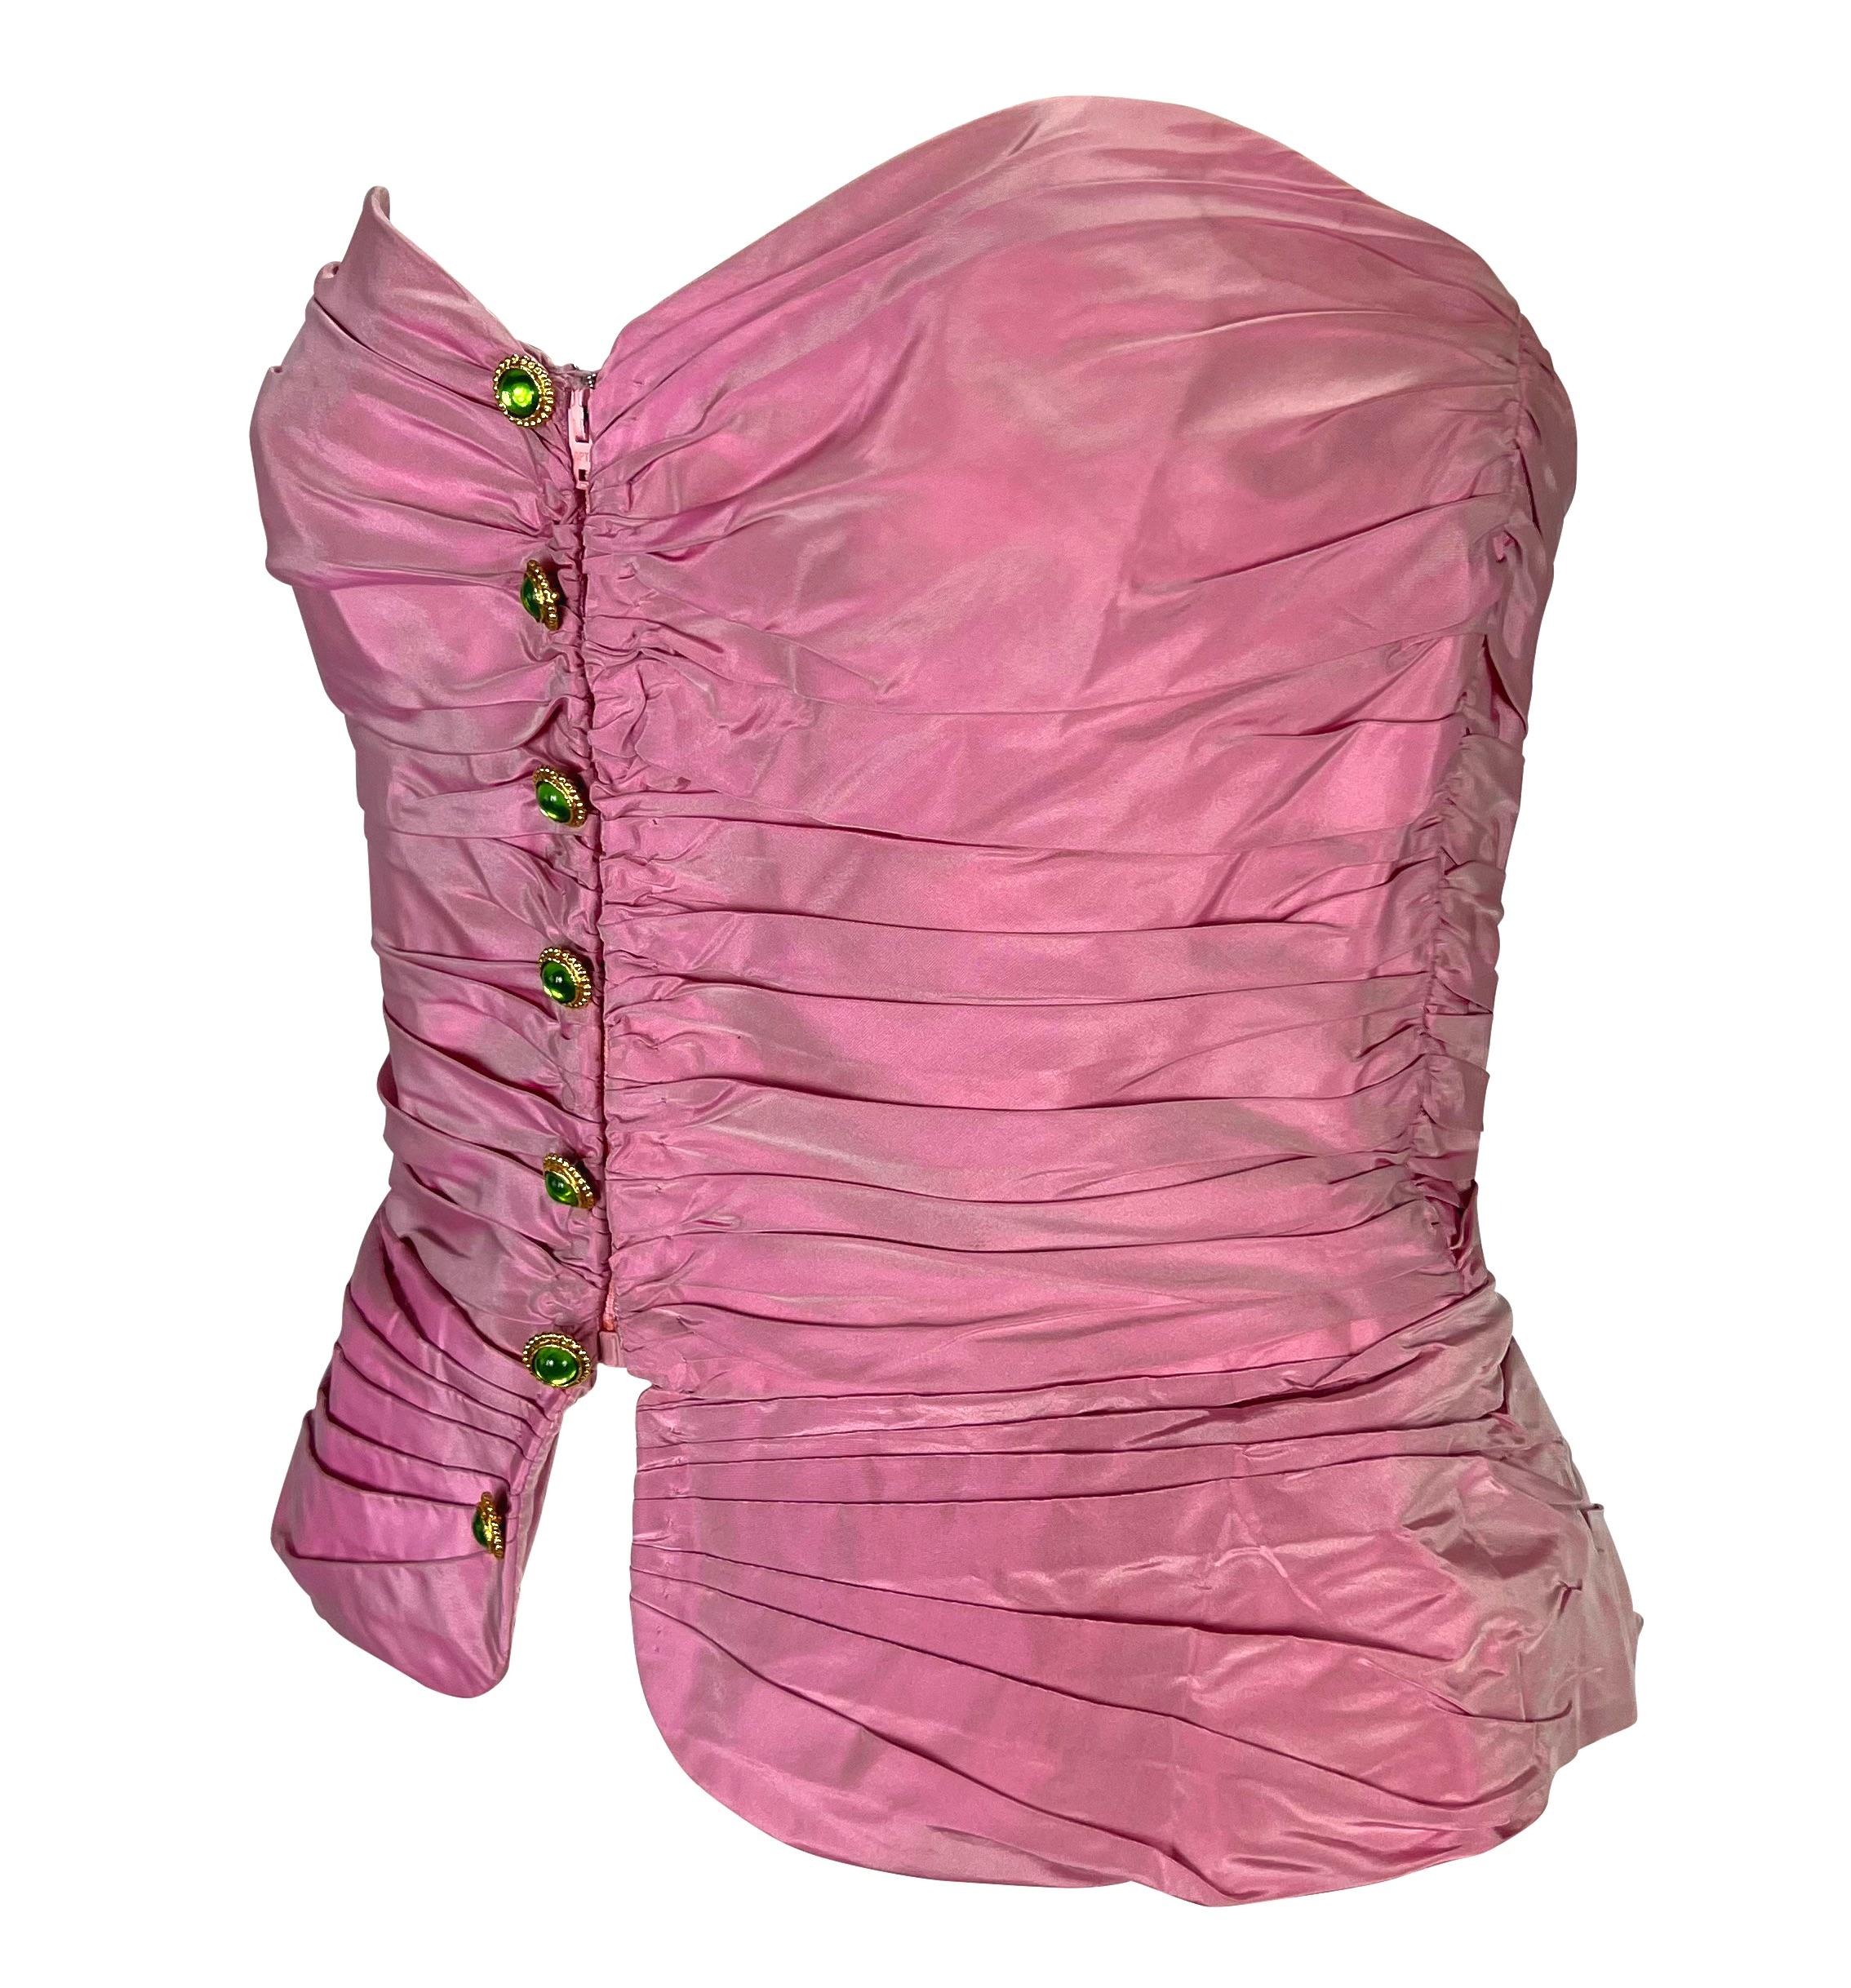 TheRealList presents: a metallic pink Emanuel Ungaro corset bustier top. From the 1980s, this fabulous ruched bustier is covered in a satin pink nylon fabric. The top features a sweetheart neckline, zipper closure at the front, and a row of green